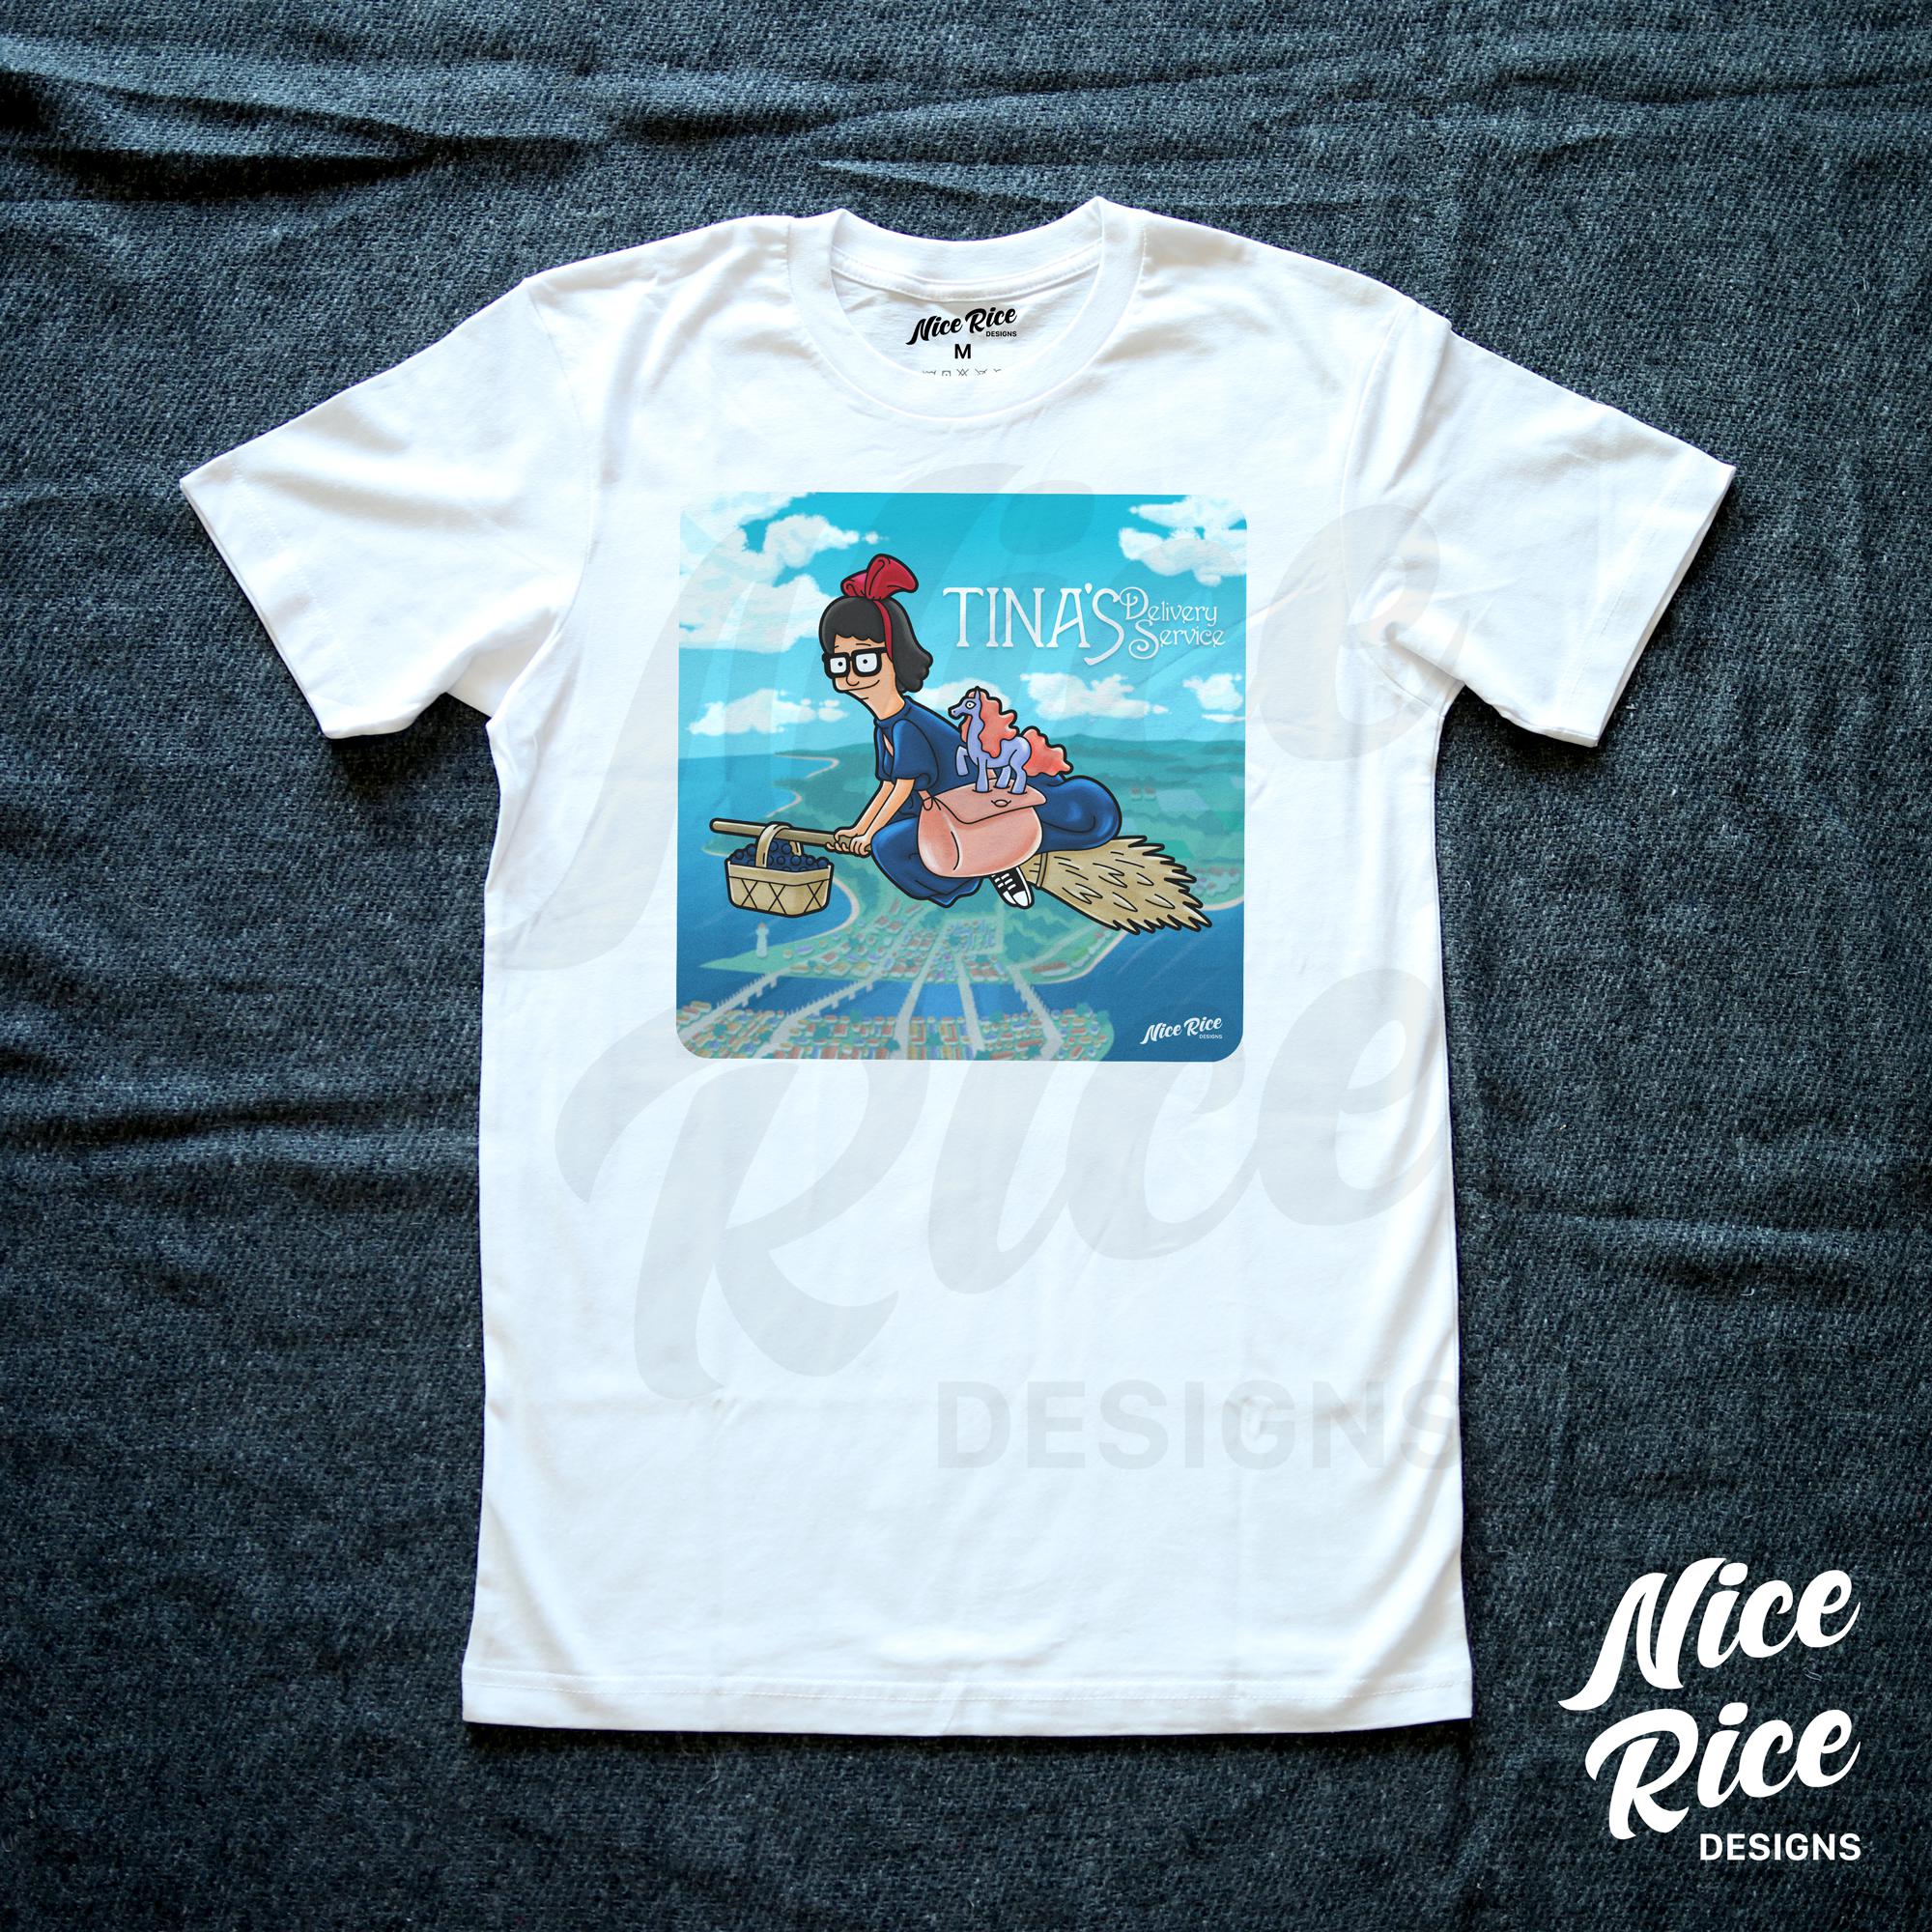 Delivery Girl Shirt by Nice Rice Designs